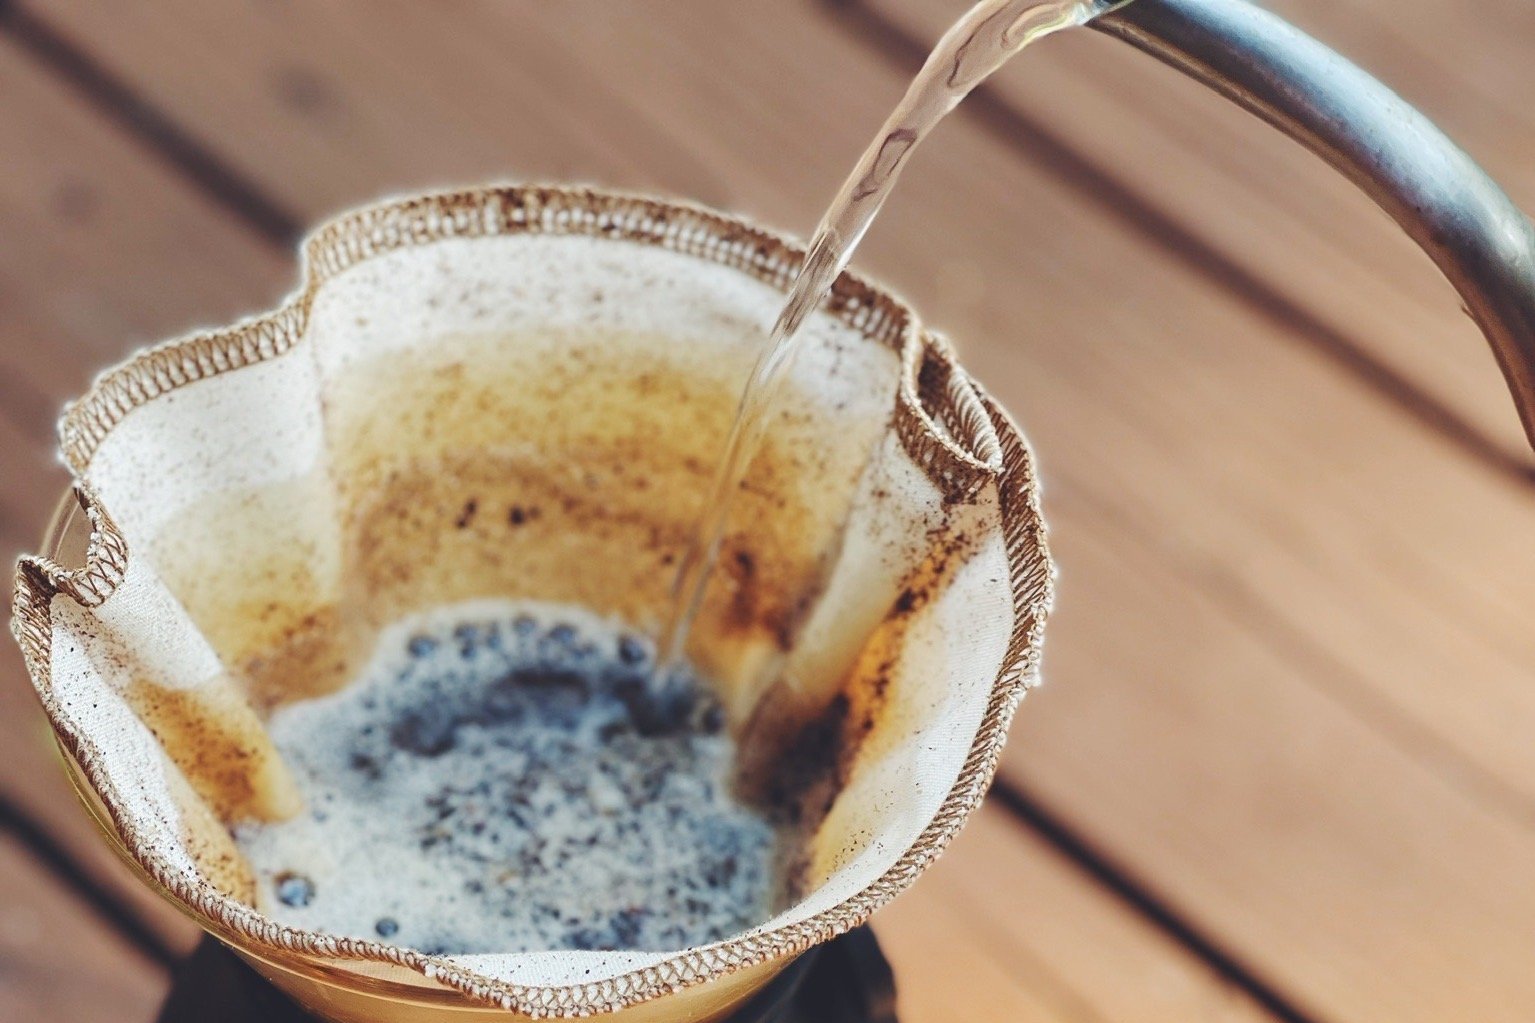 How to Make Pour-Over Coffee Like a Pro